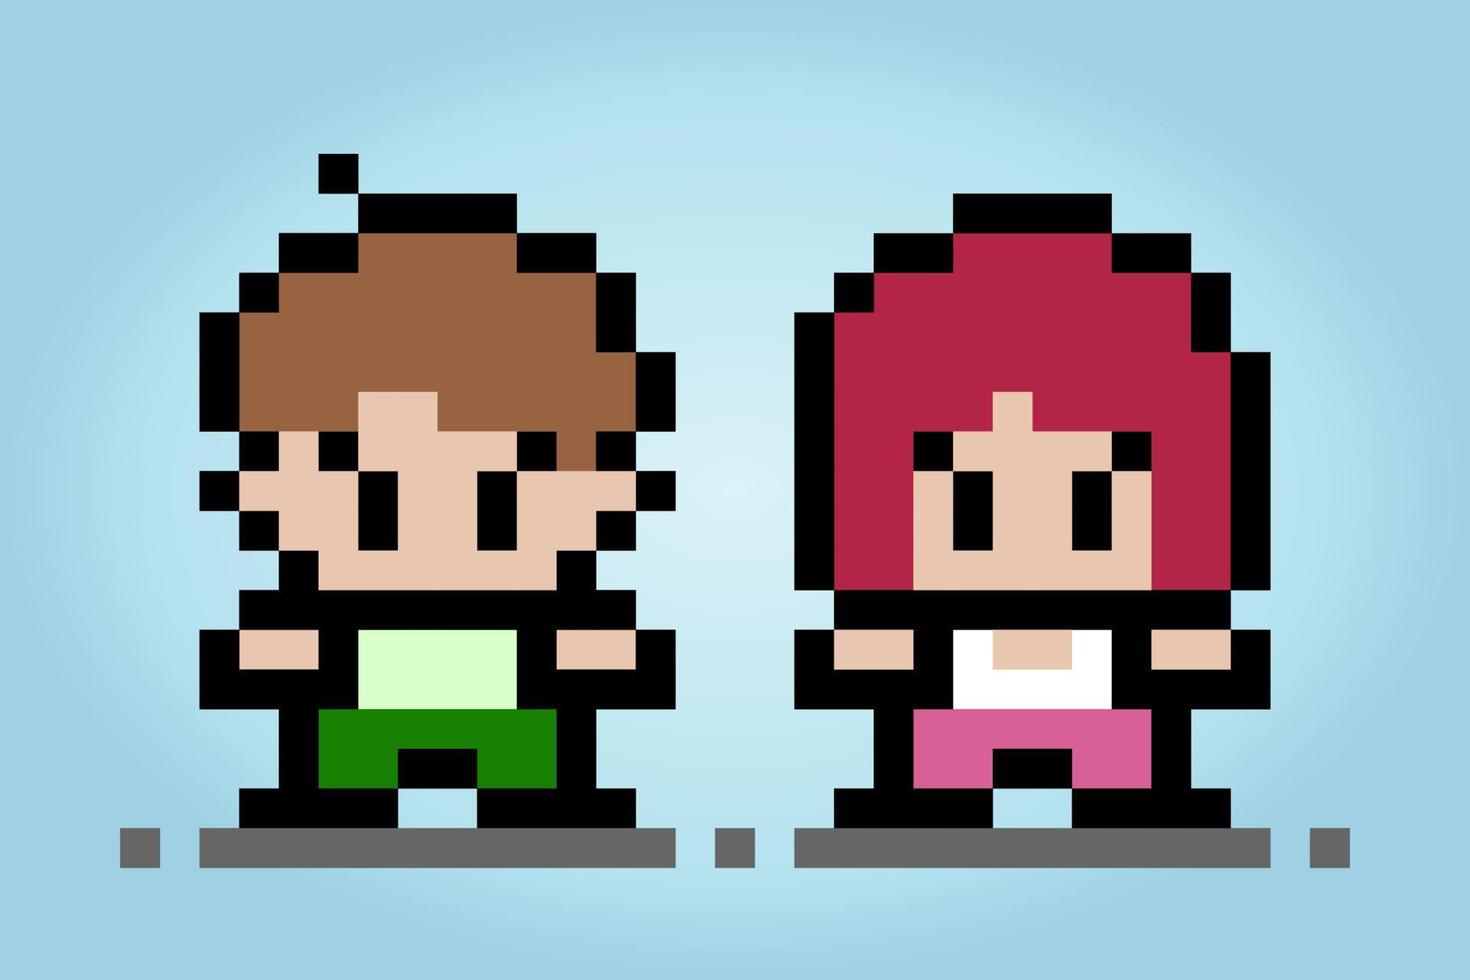 8 bit pixel human couples. Male and girl pair for game assets and cross stitch patterns in vector illustrations.